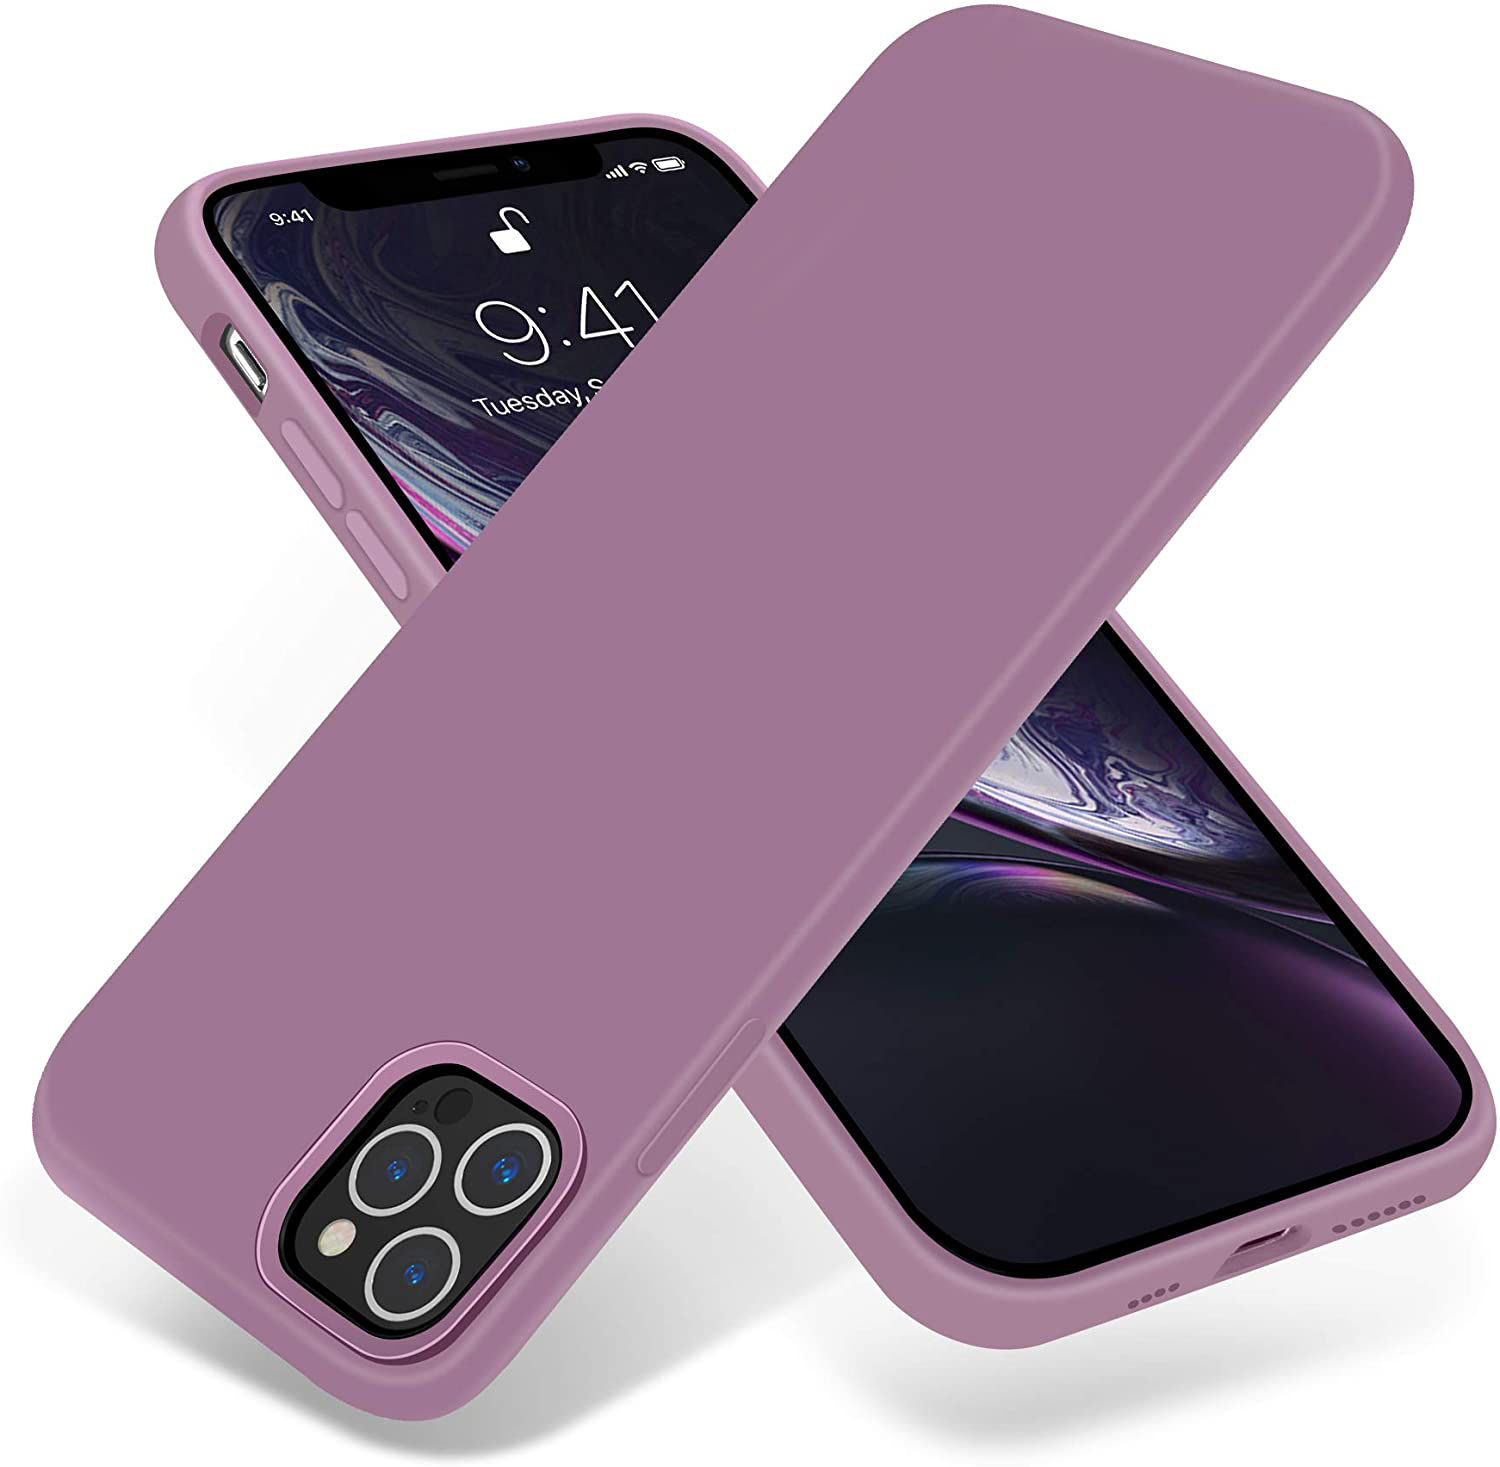 Silky and Soft Touch Series Premium Soft Liquid Silicone Rubber Full-Body Protective Bumper Case Compatible with iPhone 12 Pro Max Case 6.7 inch